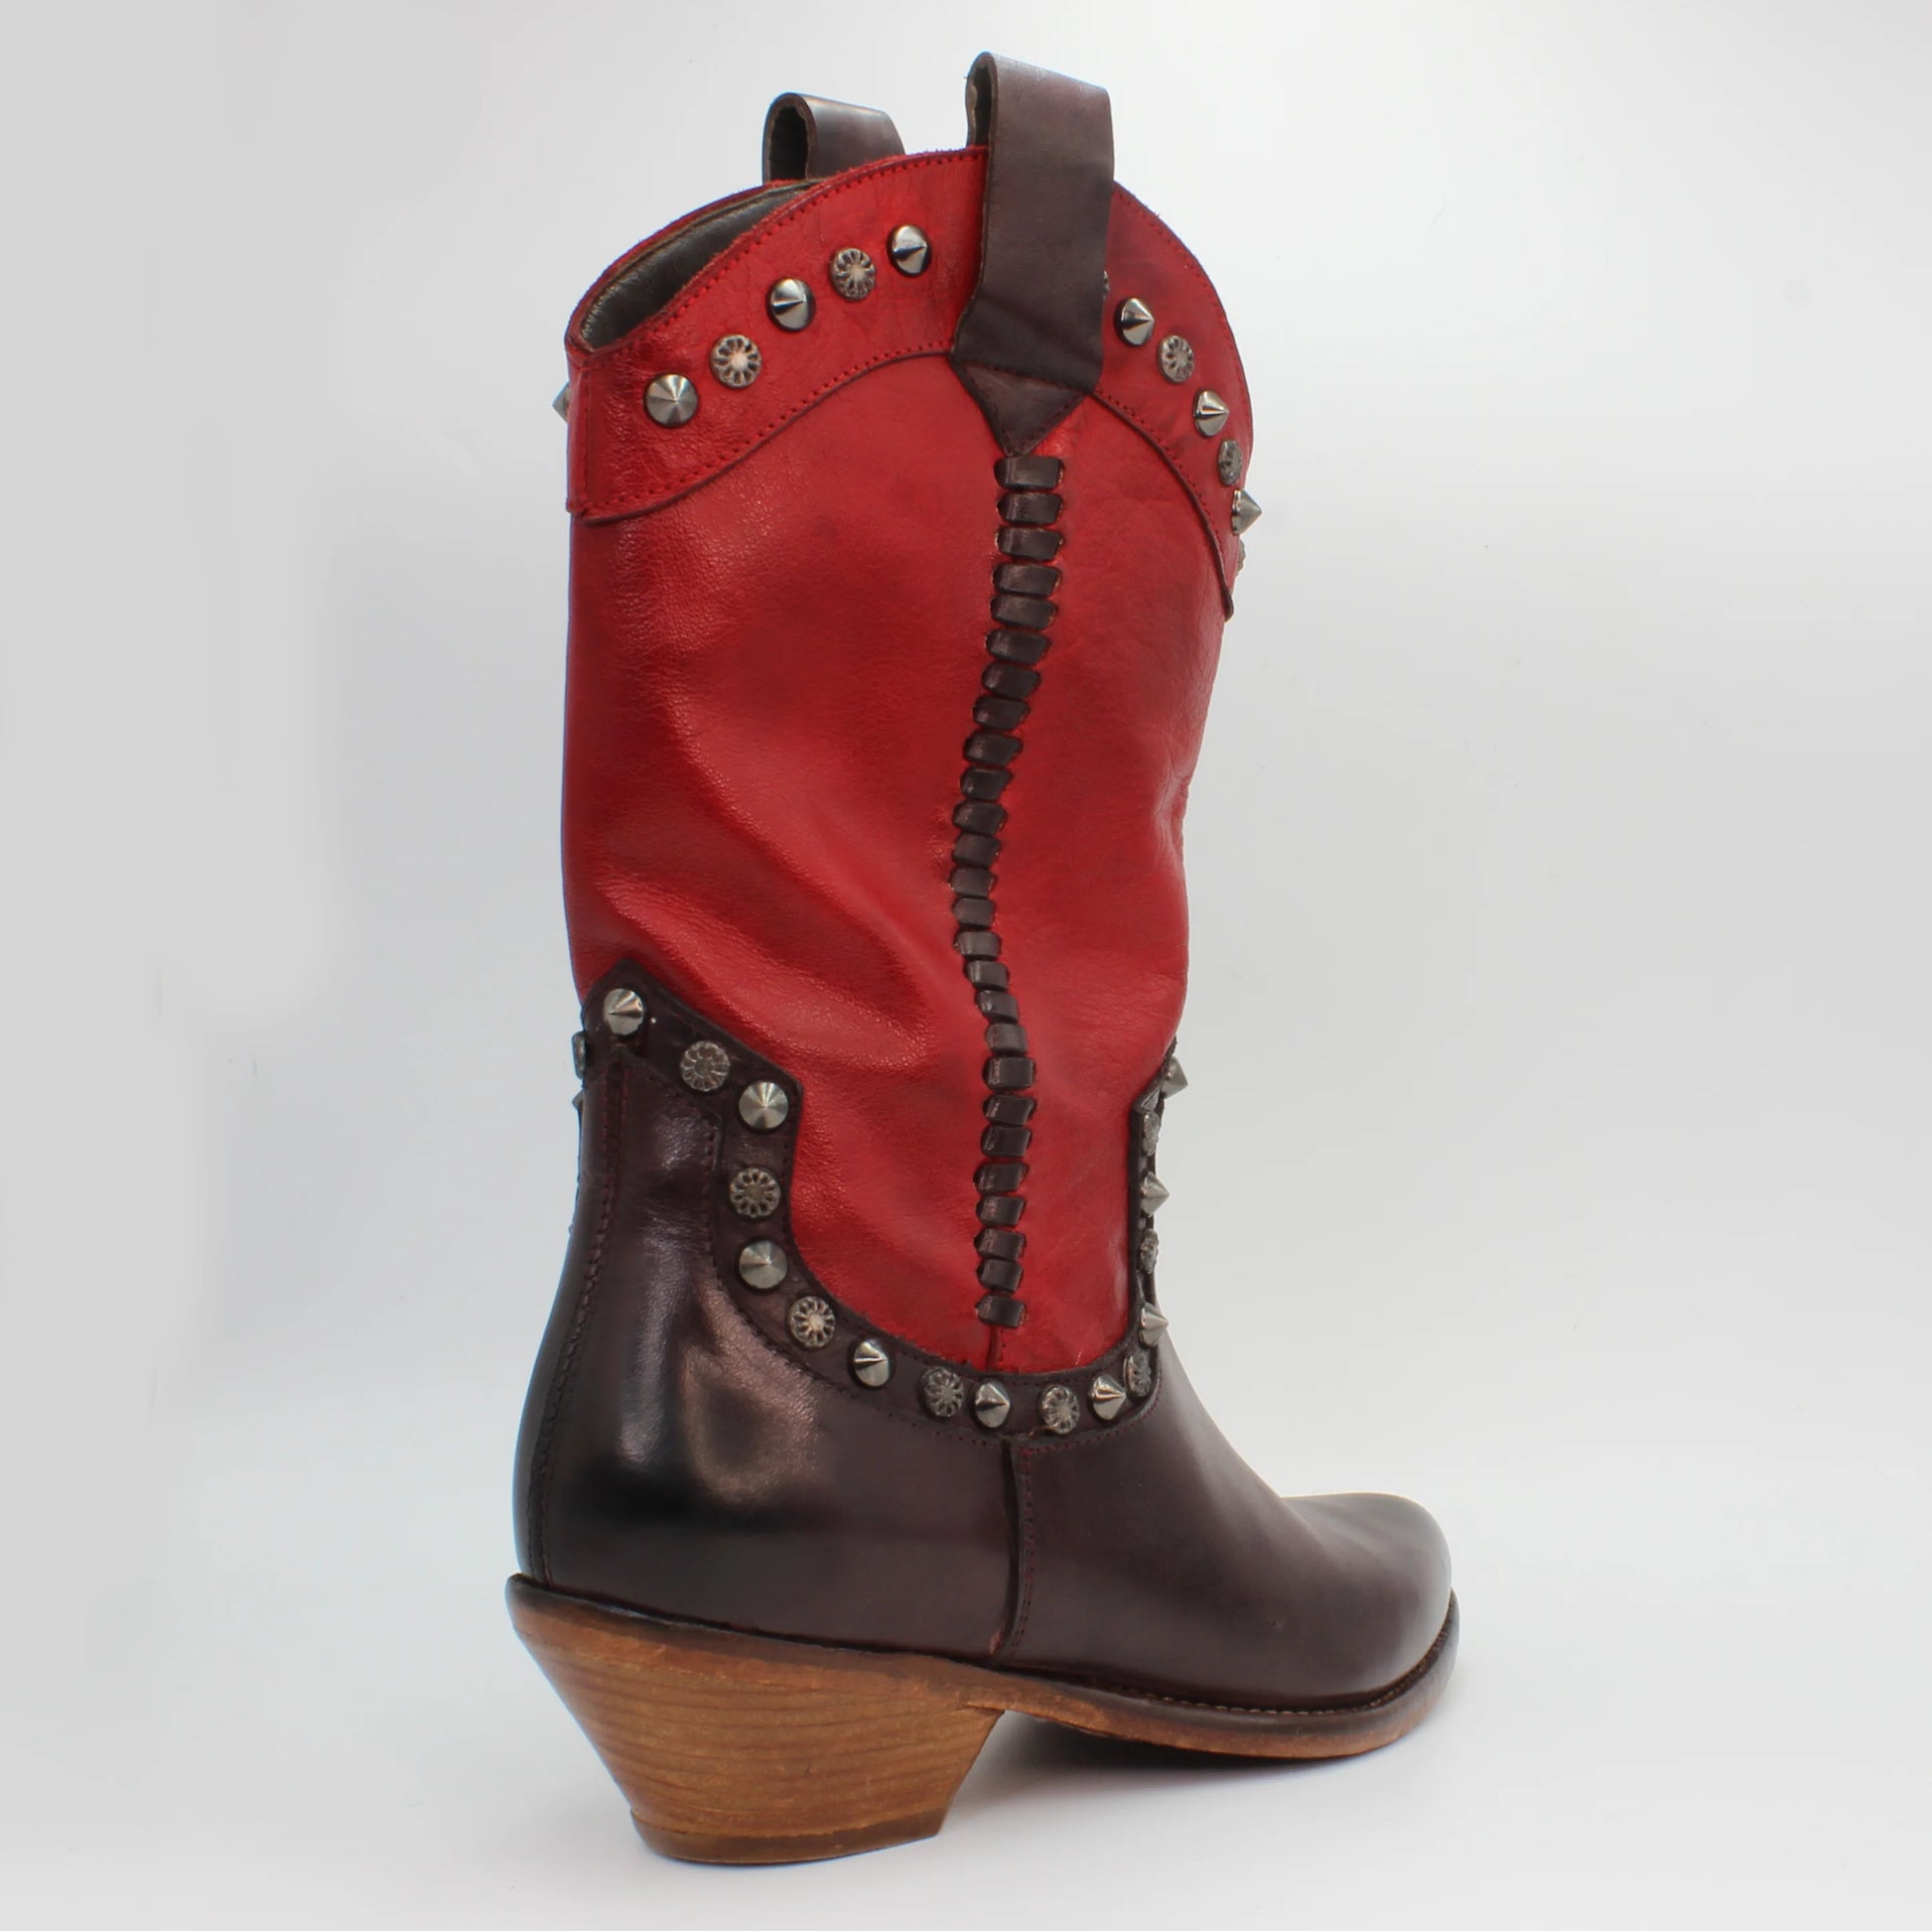 Code: JP34263/4Style: Western bootFeature: studsColour: Red and brownMaterial: Calf leatherSole Material: rubber Made in Italy